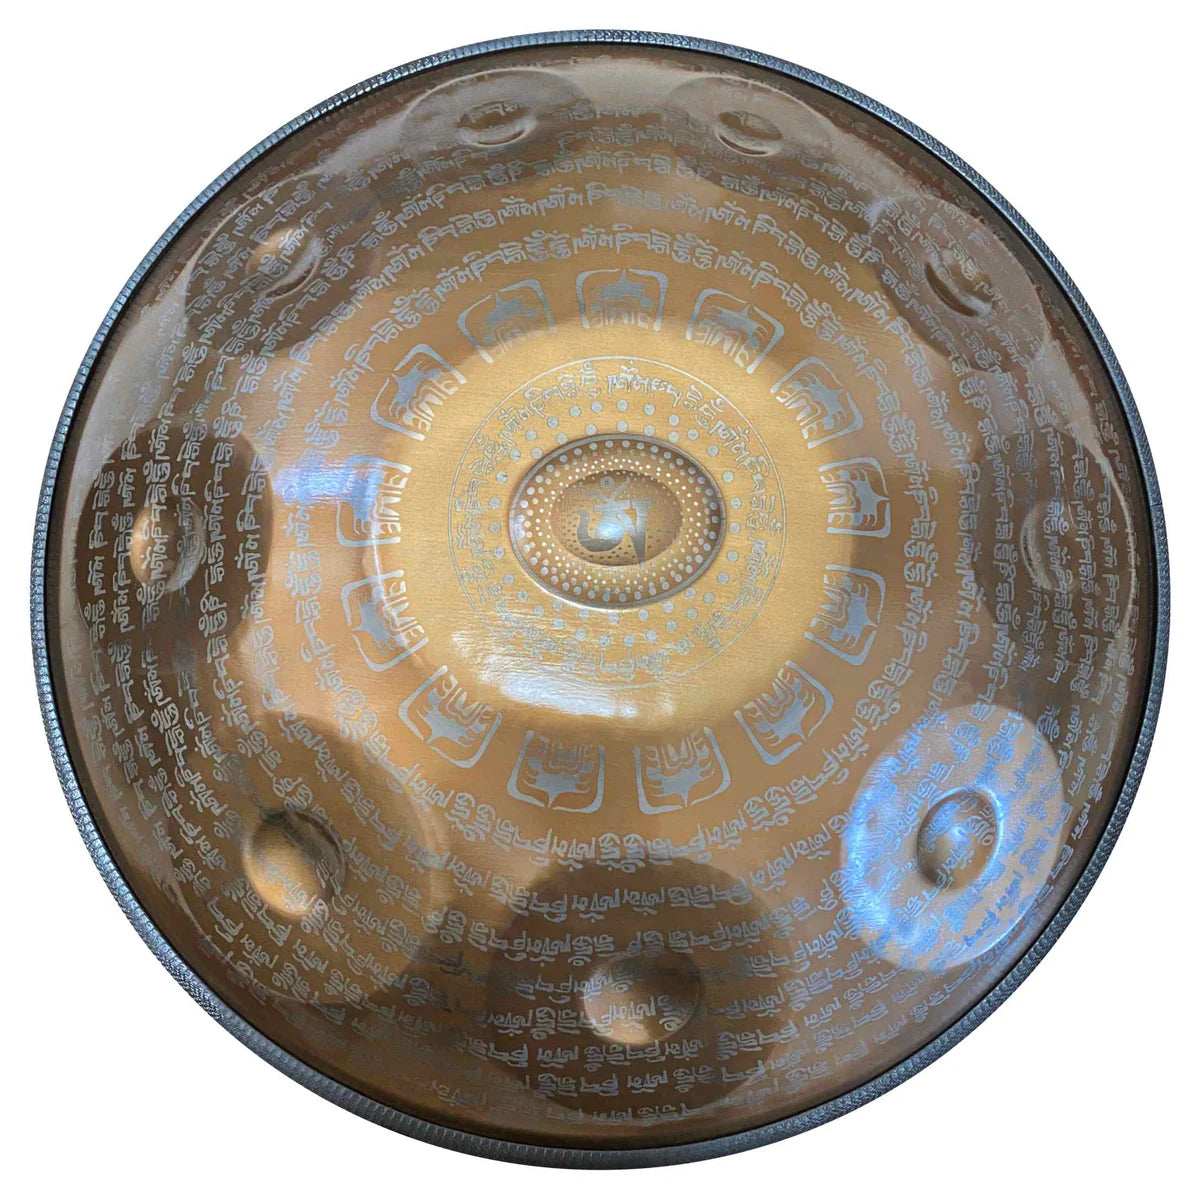 What is a Handpan Made Of?